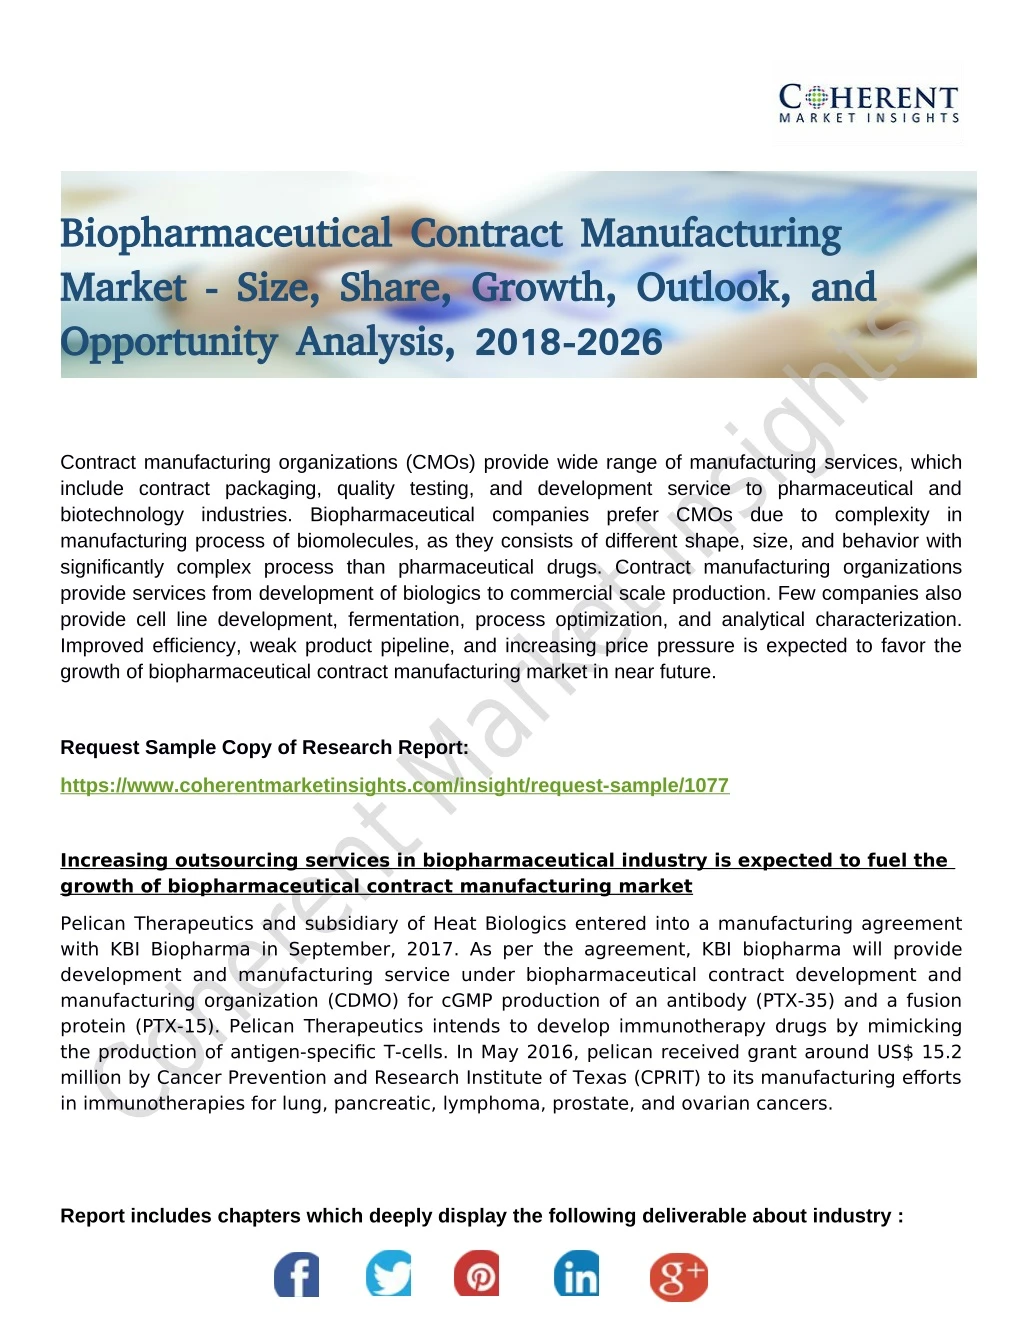 biopharmaceutical contract manufacturing